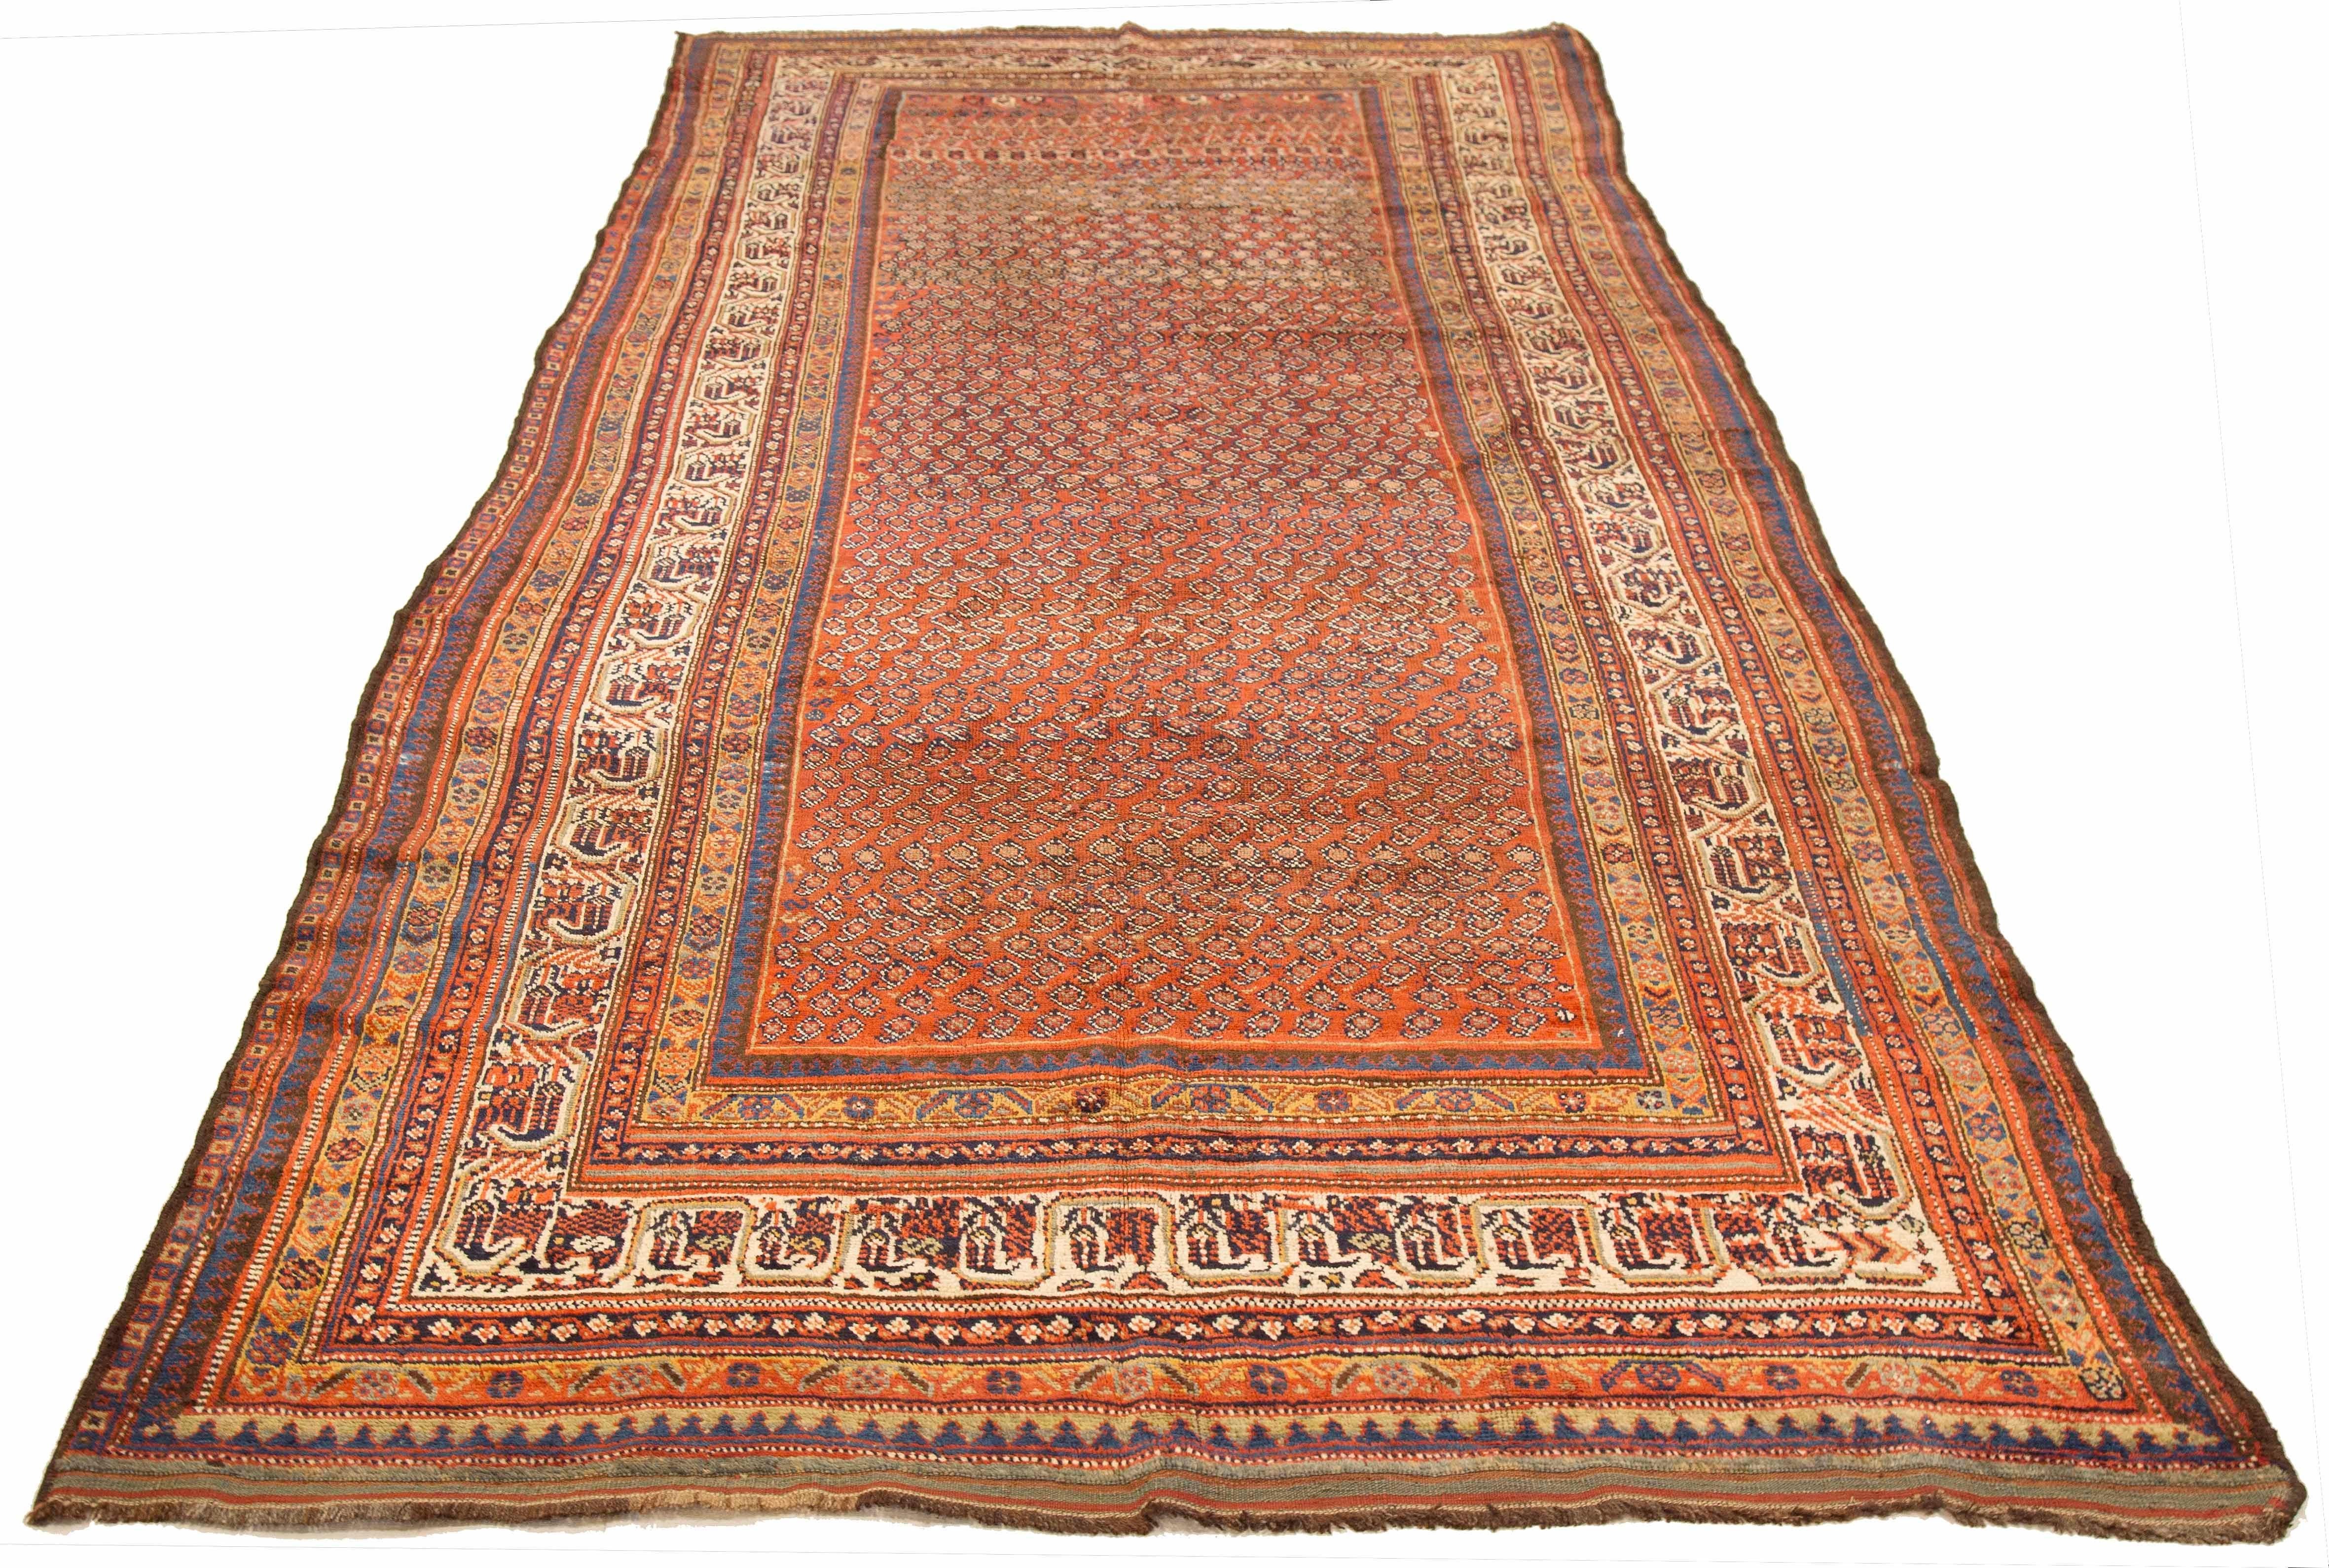 Antique Persian rug handwoven from the finest sheep’s wool and colored with all-natural vegetable dyes that are safe for humans and pets. It’s a traditional Shiraz design featuring black and red tribal details over a navy field. It’s a lovely piece